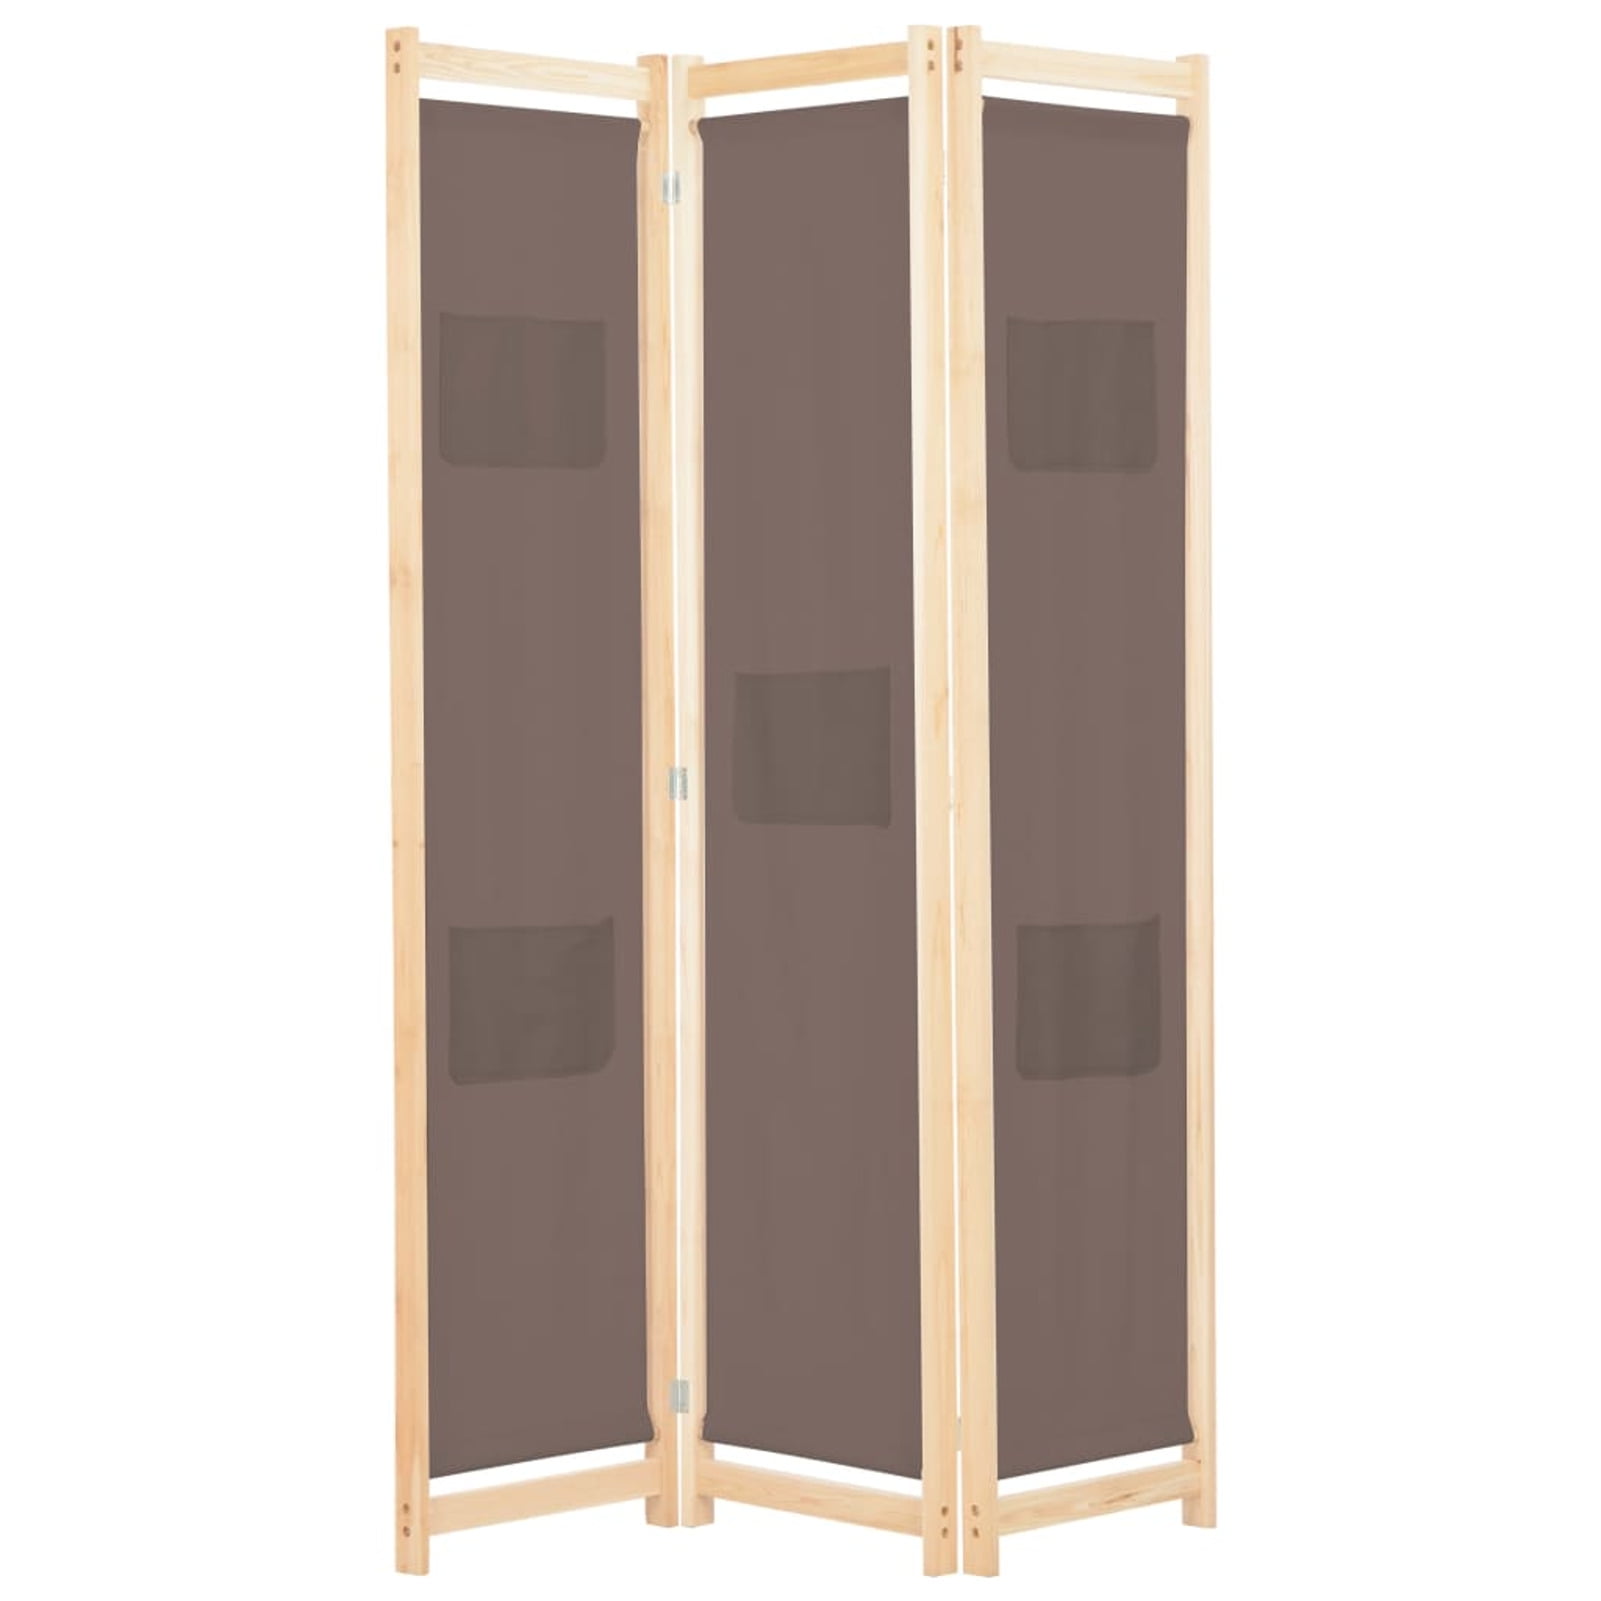 Details about   6 Panel Peacock Screen Room Divider Wood-Folding Partition Commemorative-Gift 